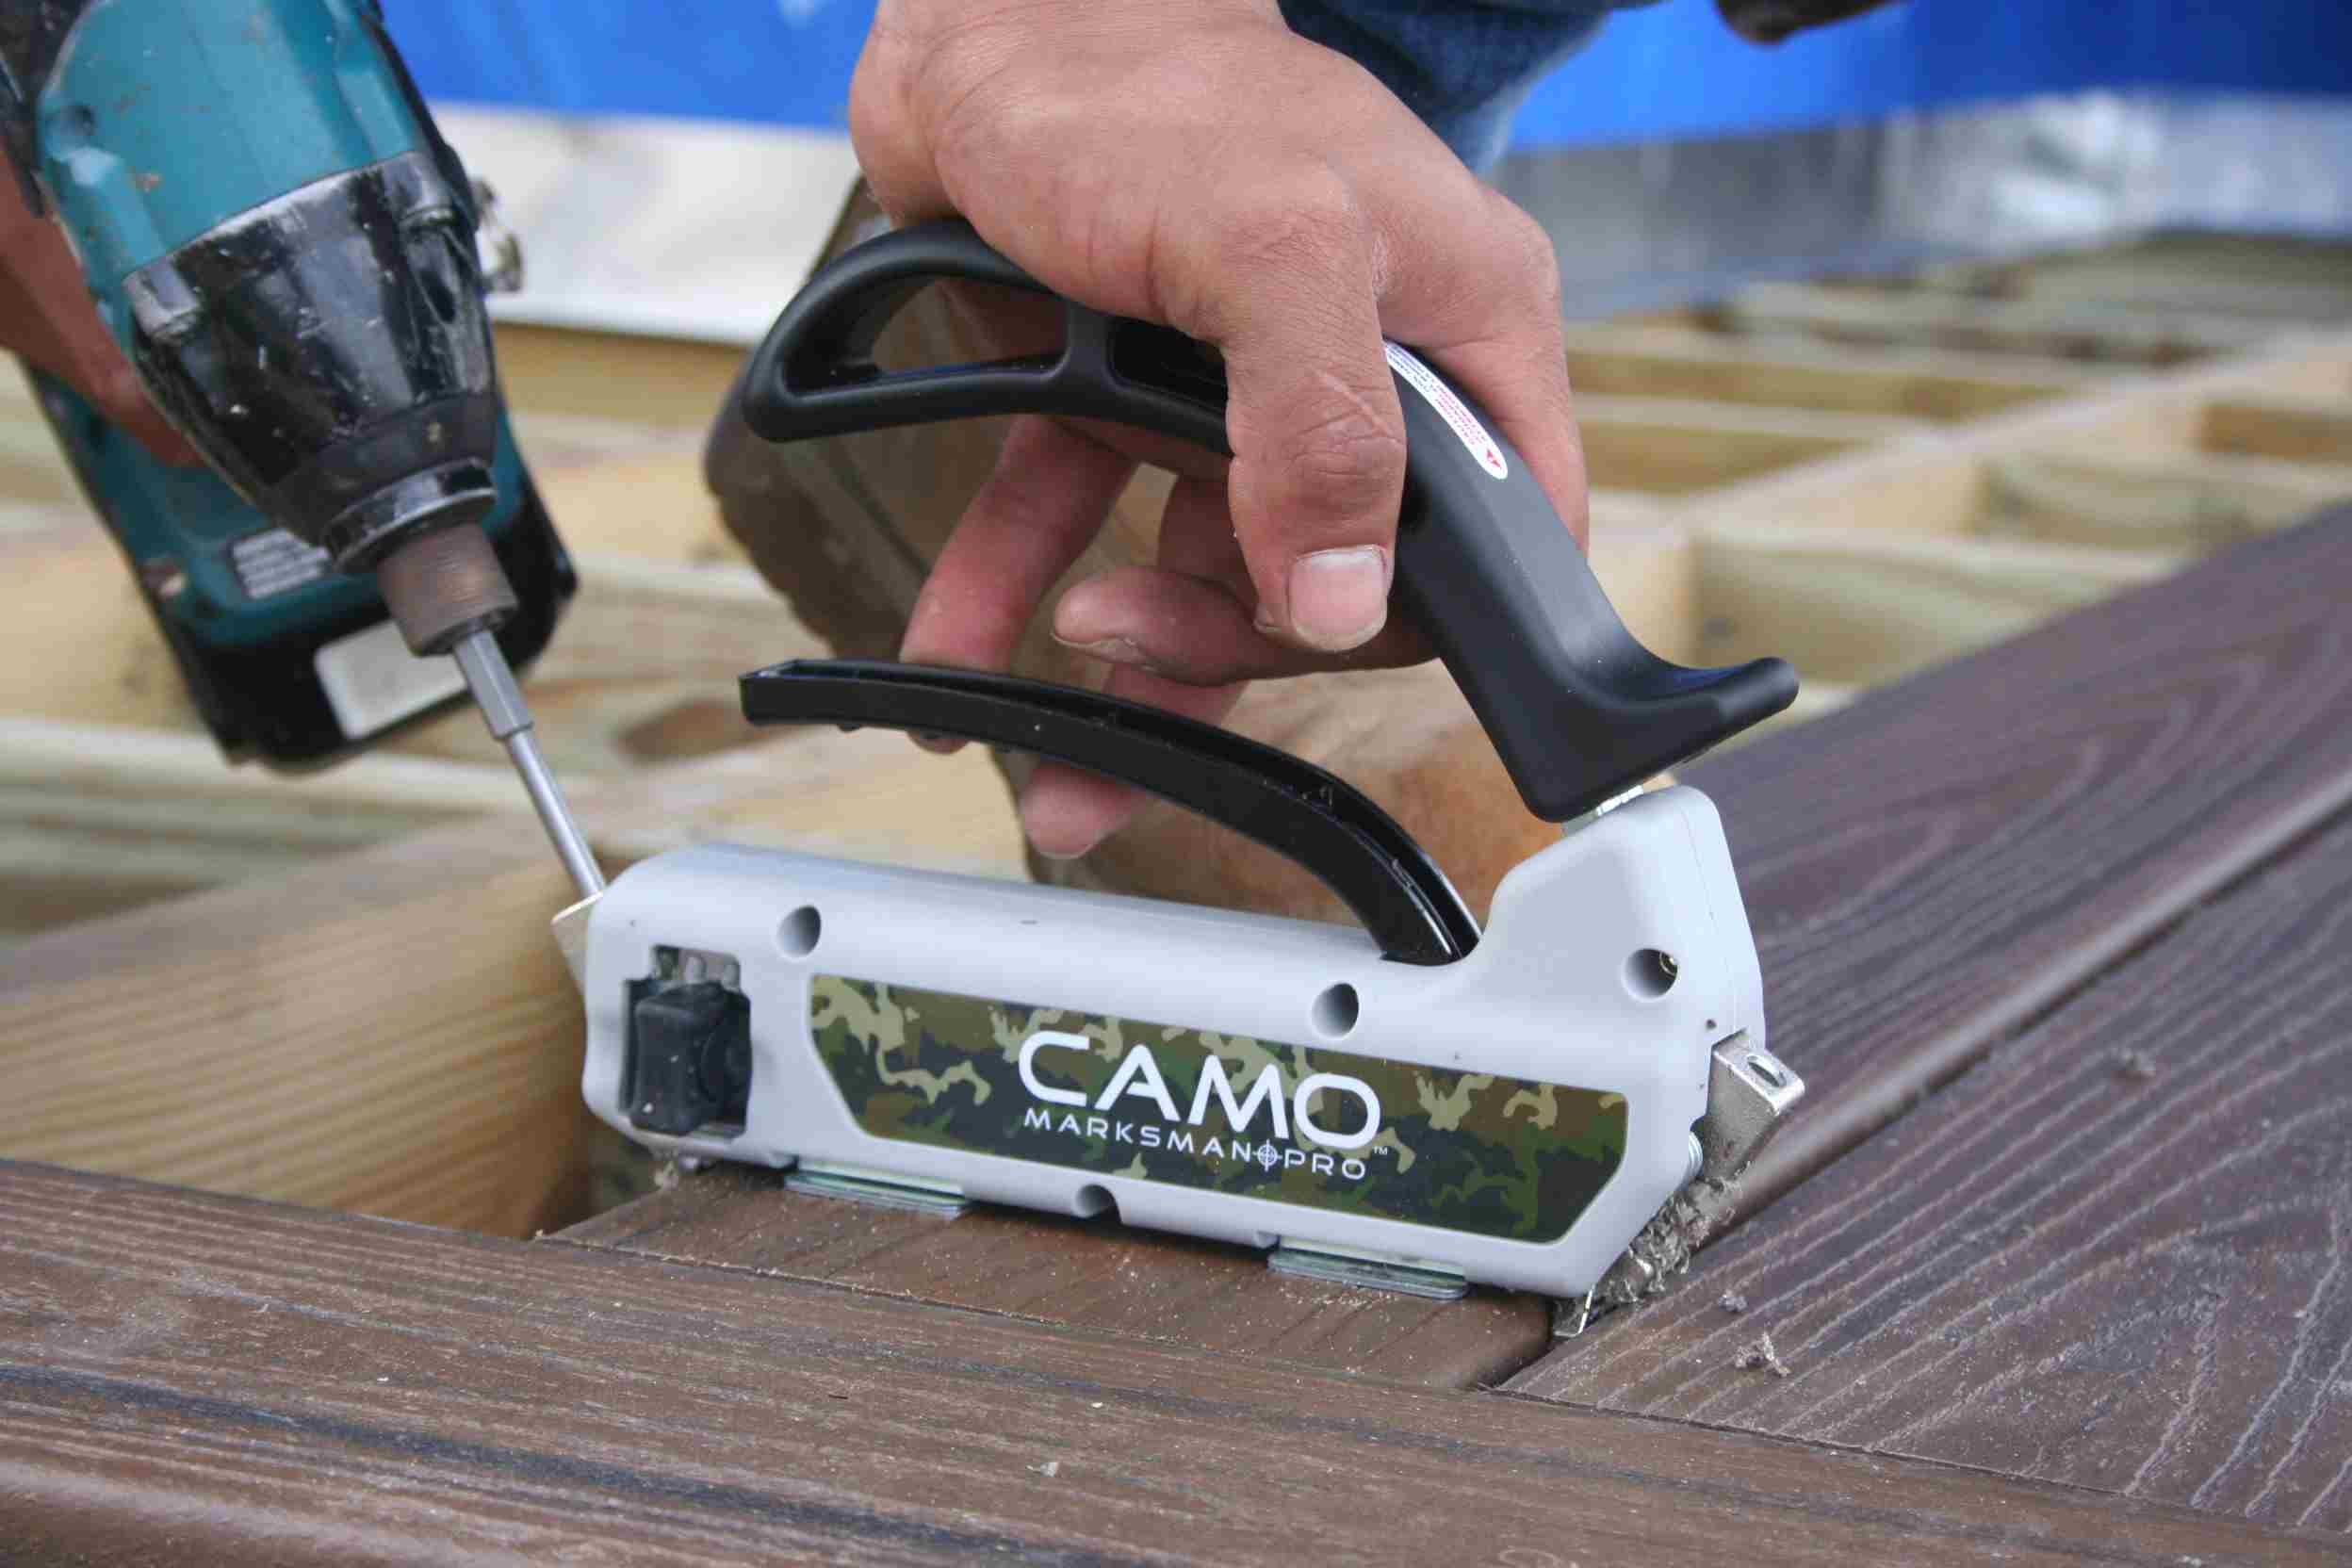 Camos Deck Fastening System Ensures Smooth Deck Building inside measurements 2496 X 1664